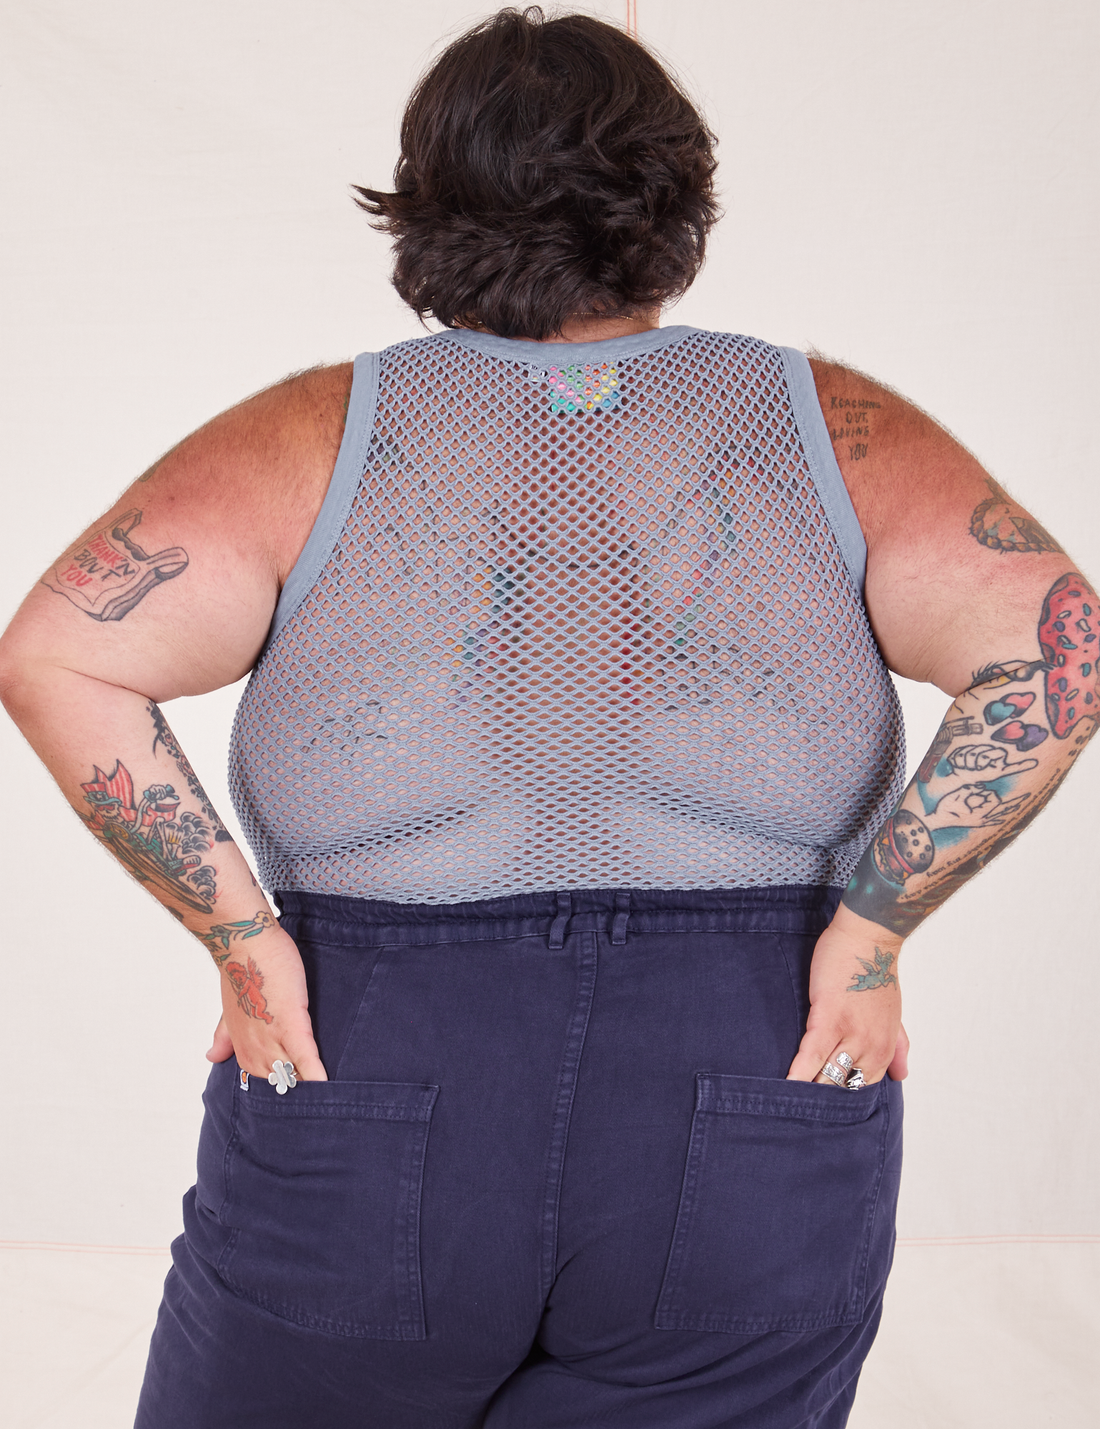 Back view of Mesh Tank Top in Periwinkle and navy Western Pants worn by Sam